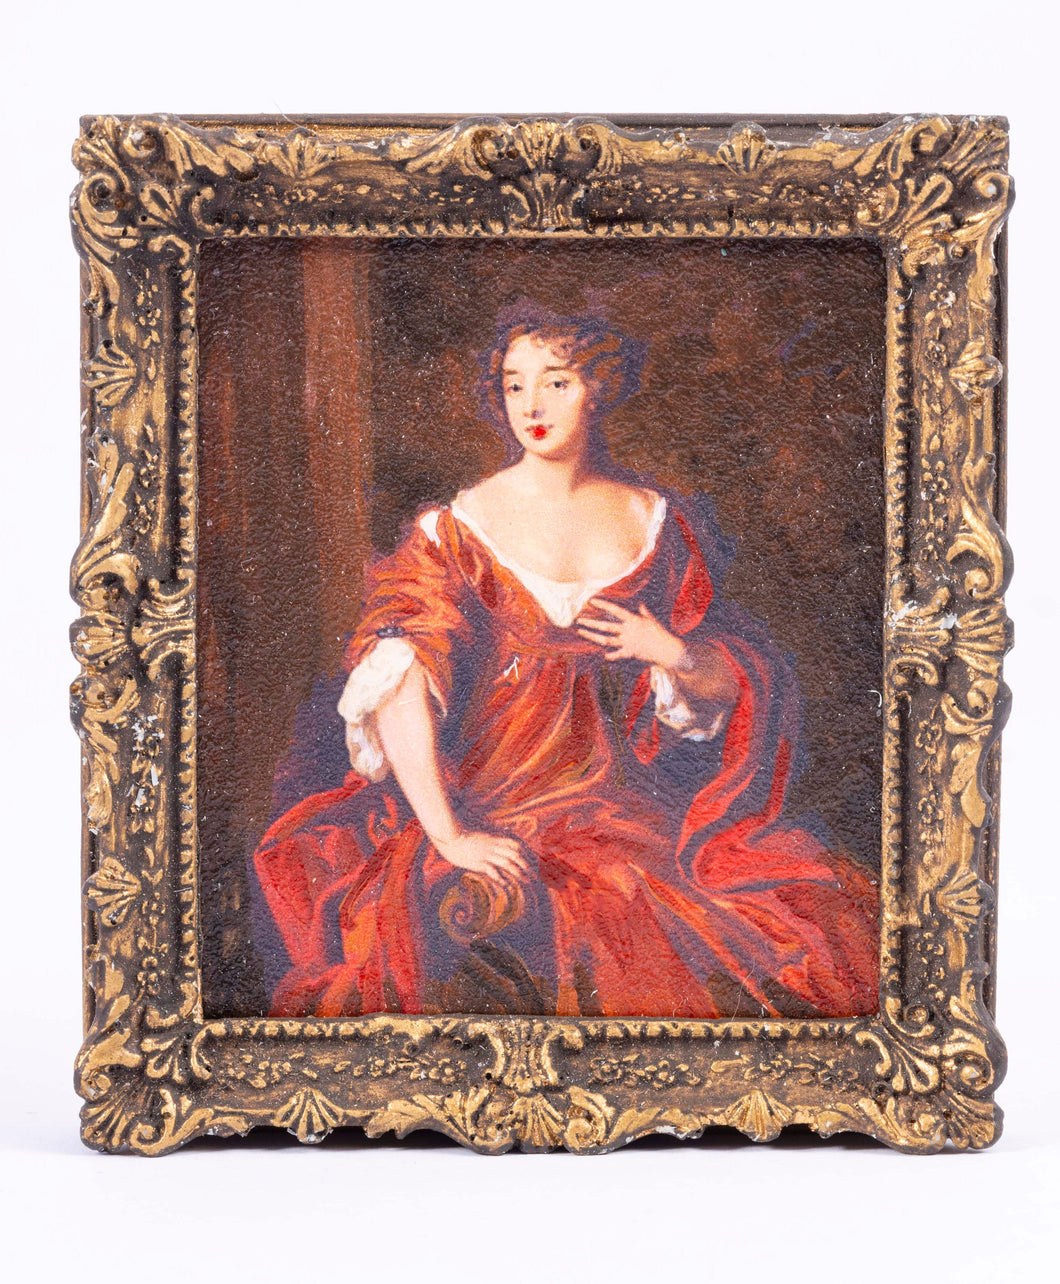 Dollhouse Miniature ~ Painting of Lady Wellgwyn, From Lee Lefkowitz Collection